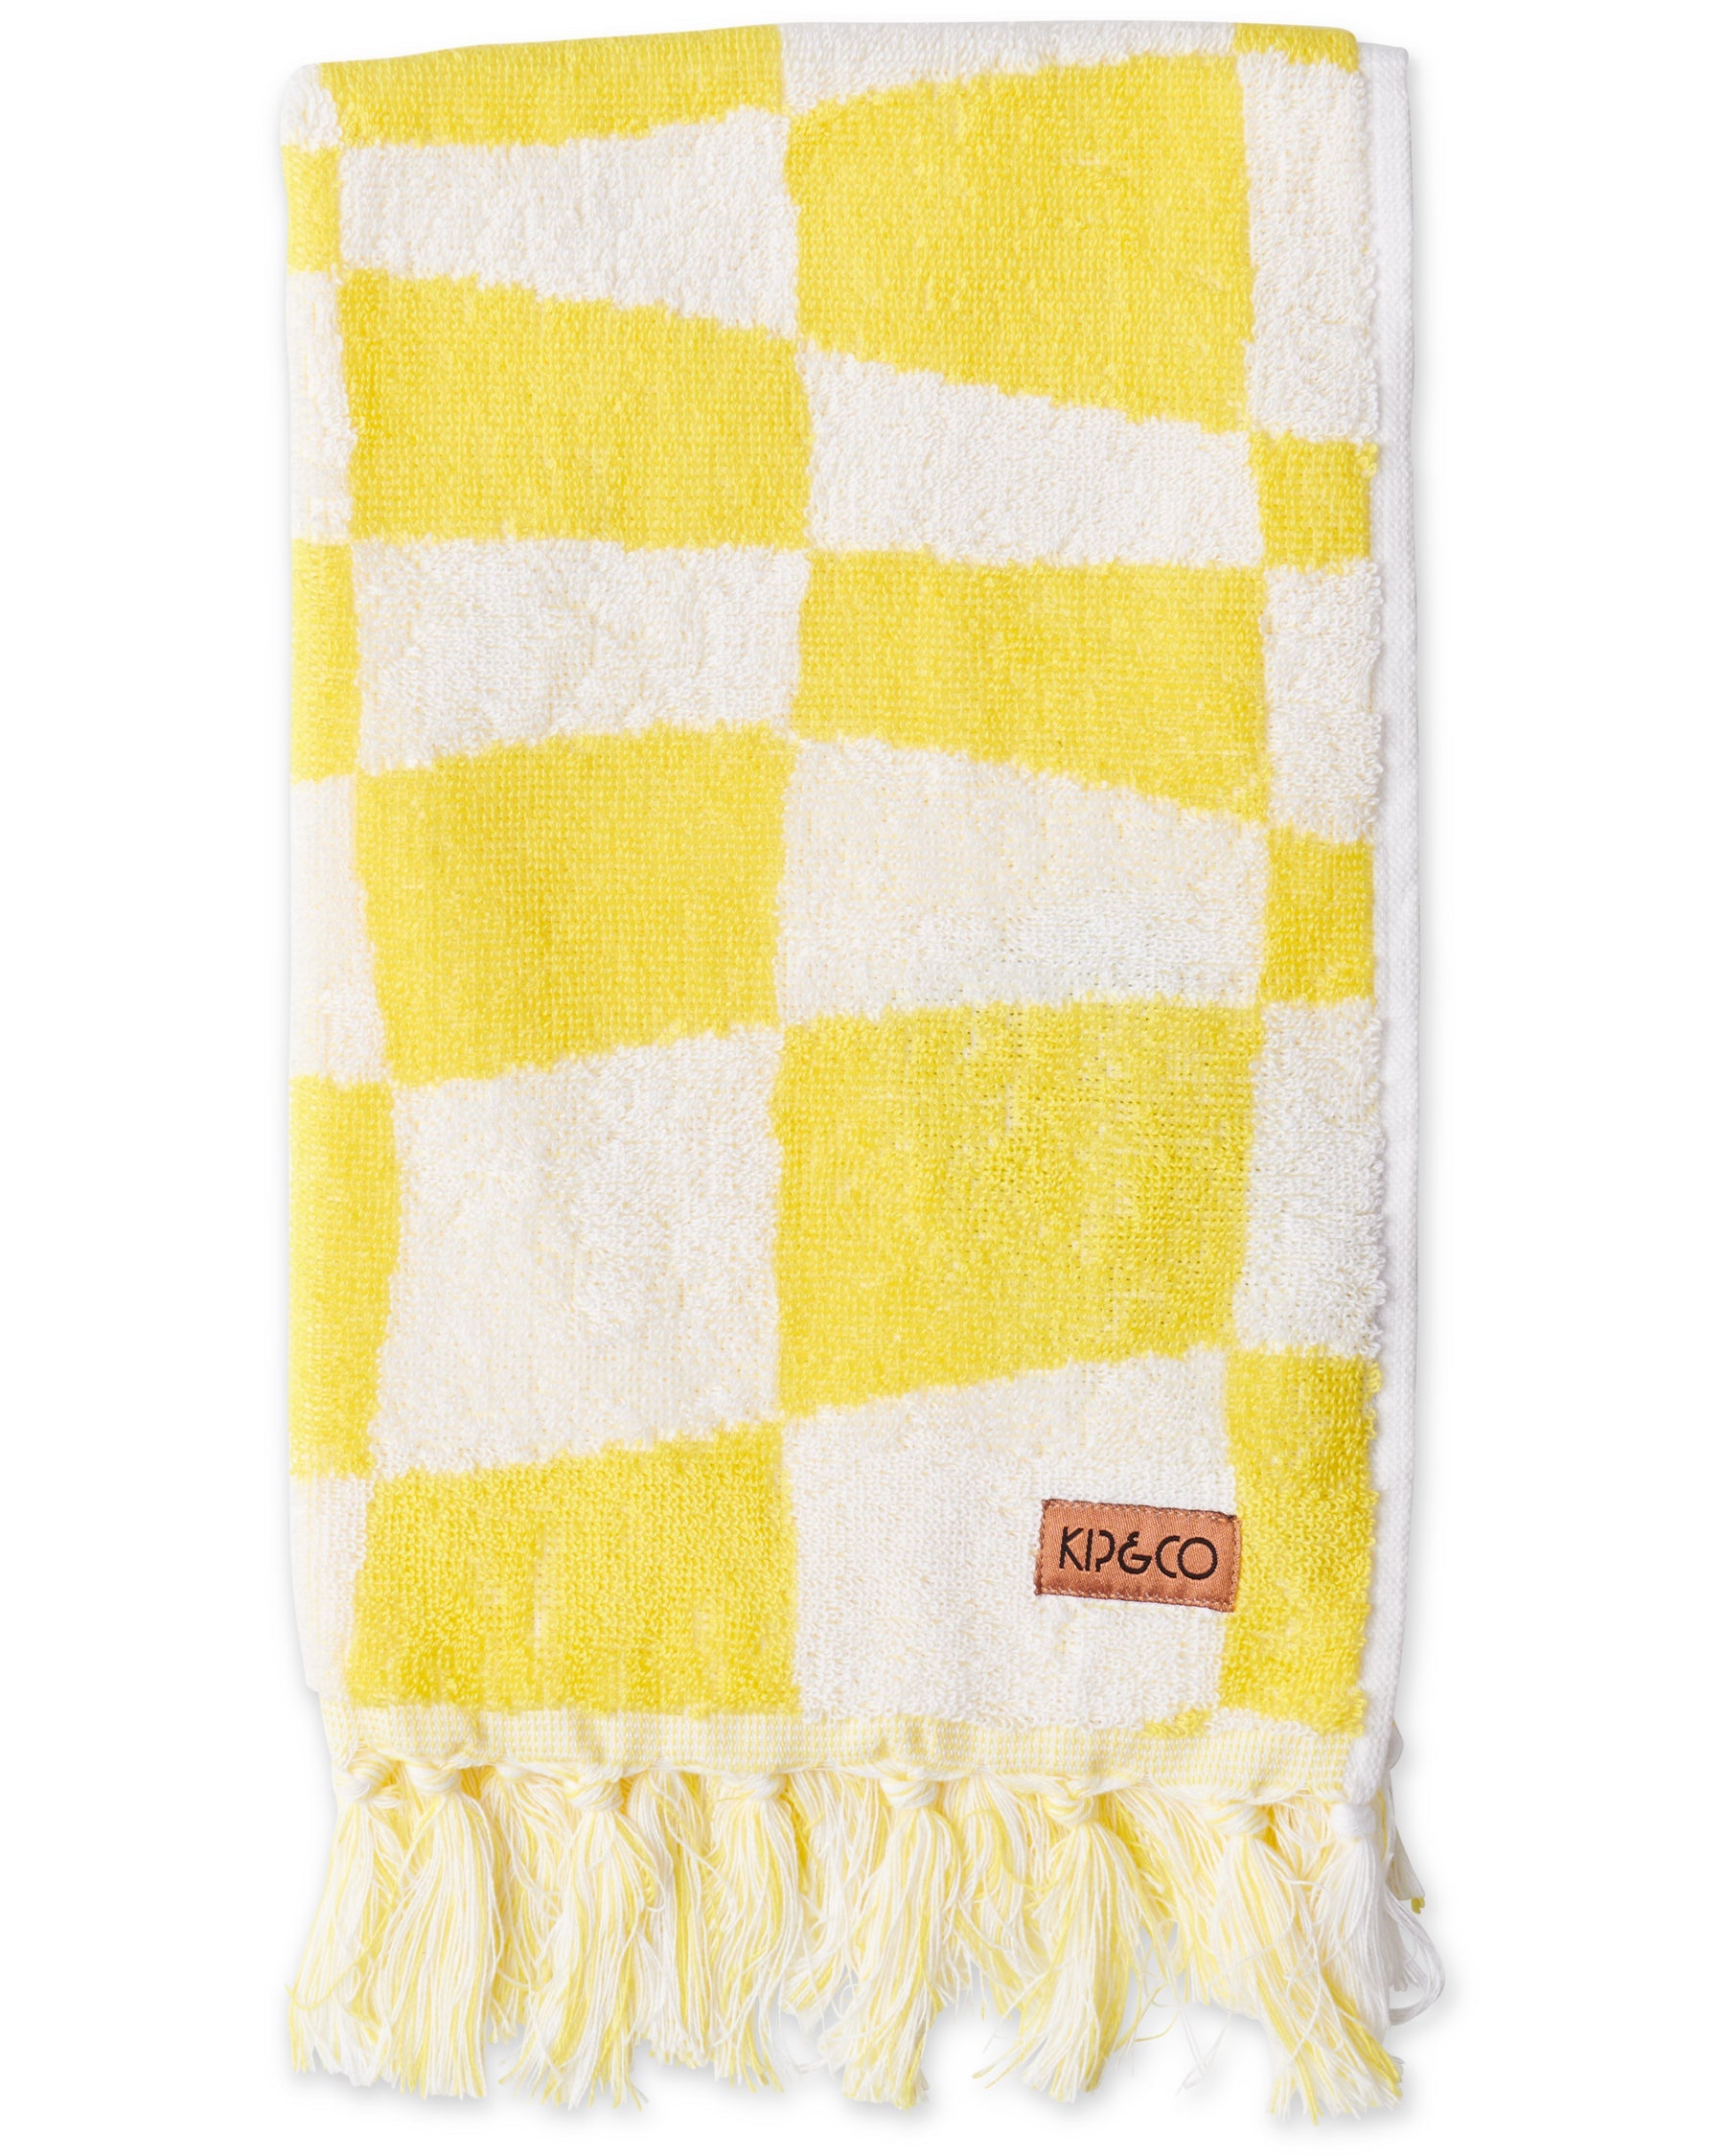 https://cdn.shopify.com/s/files/1/0231/5727/6752/products/Kip-and-Co-Checkerboard-Yellow-Terry-Hand-Towel.jpg?v=1678239761